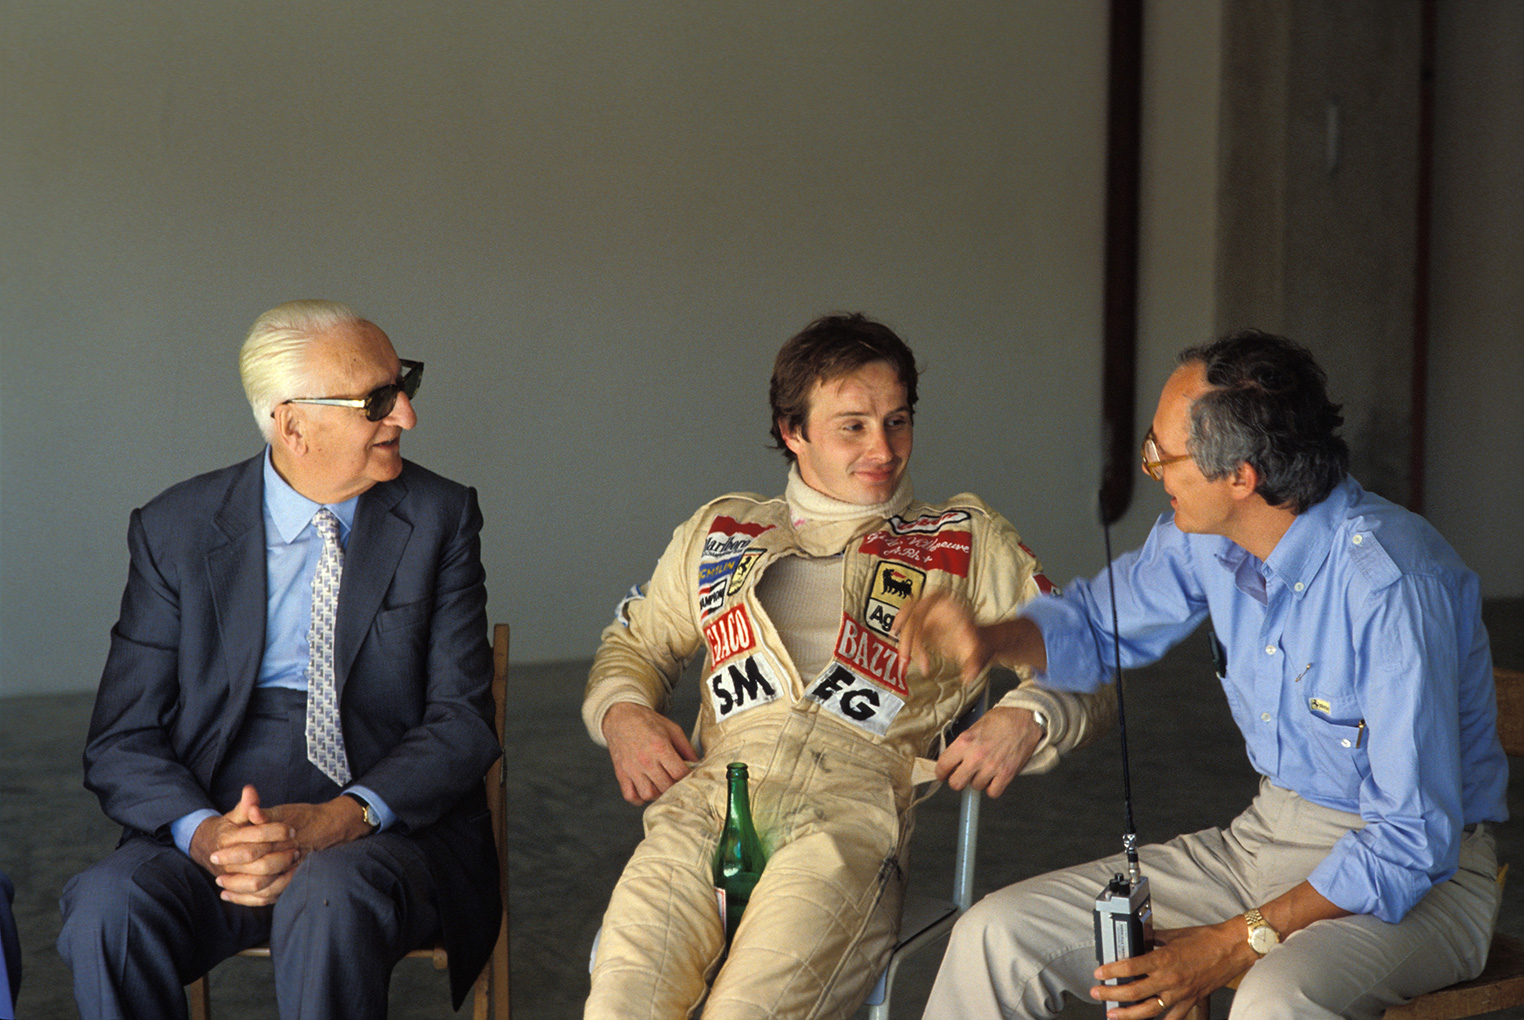 "I love this shot of a relaxed Gilles Villeneuve [center] with Enzo Ferrari [left] and Roberto Nosetto at an Imola test in 1980."